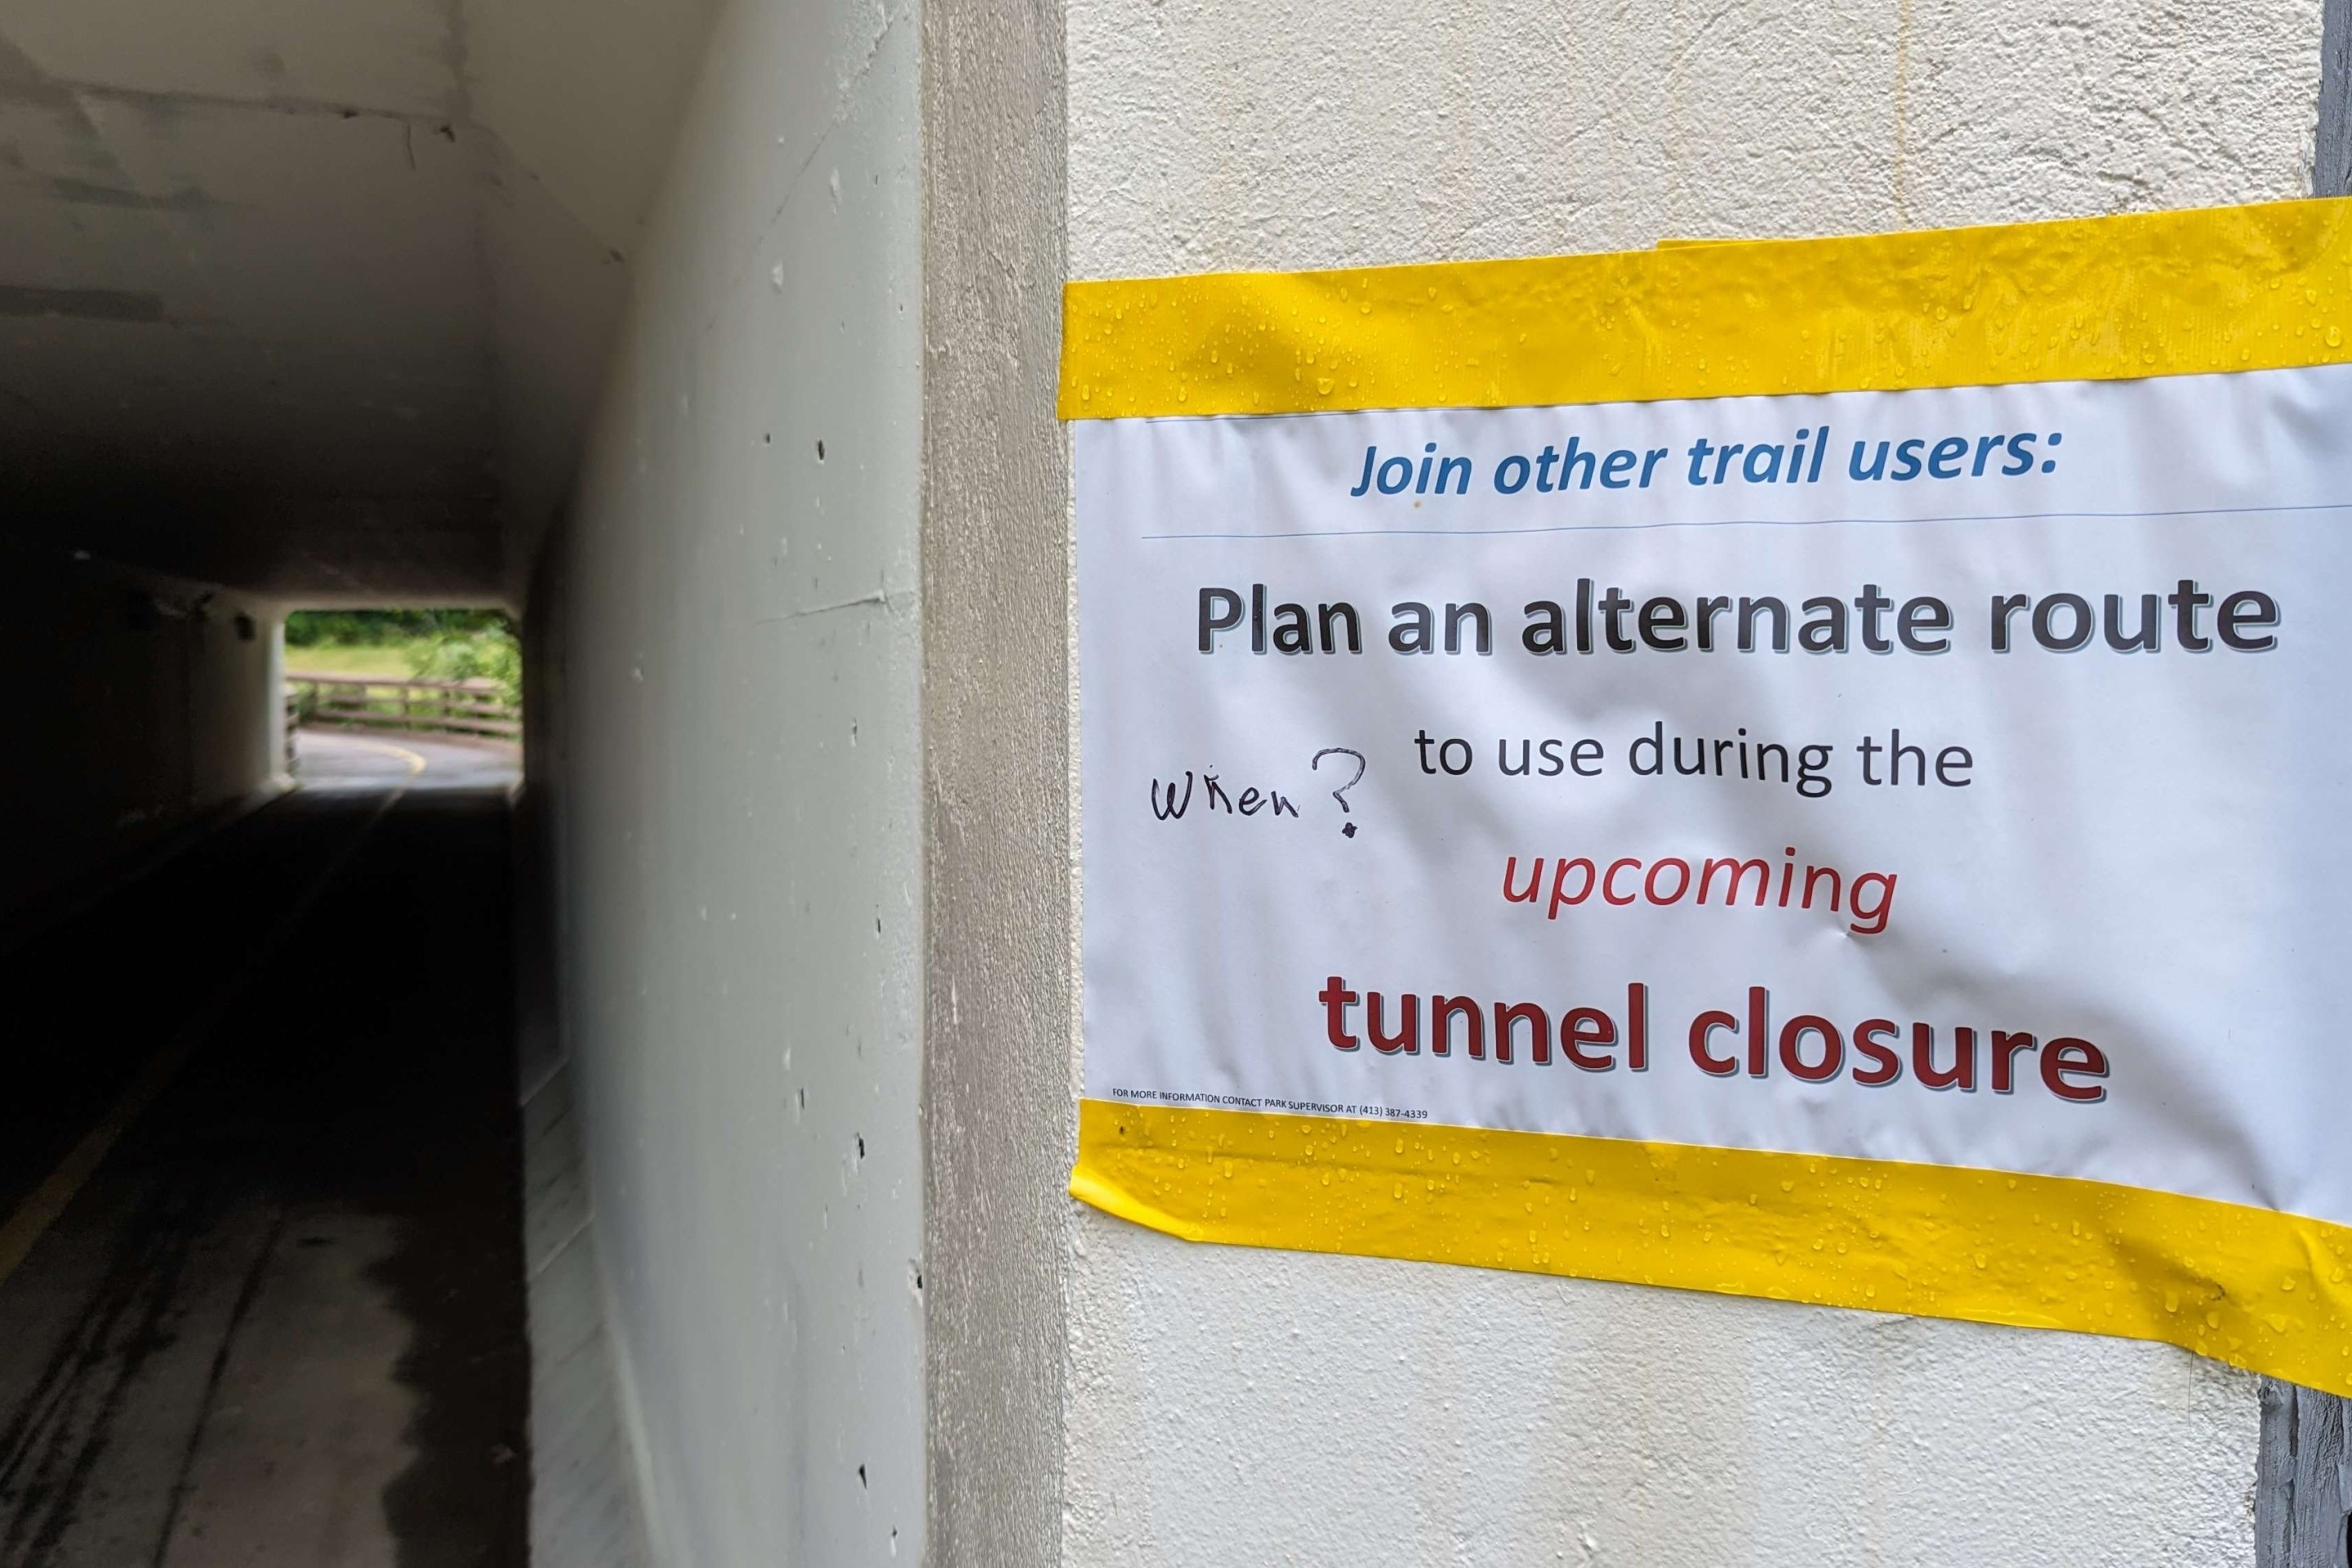 A homemade sign printed on 8.5"x11" paper is haphazardly taped to the entrance to a pedestrian tunnel. The sign uses different fonts for each line of text. The top line reads (in blue, italicized text): "Join other trail users:" the next line, in black, larger text: "Plan an alternate route", the next line, smaller black text: "to use during the" (in red, larger italicized text) "upcoming" (final line, red bolder text) "tunnel closure". On the left side of the paper, someone has hand-written the word "When?" with a black marker. Fine print at the bottom of the sign says "FOR MORE INFORMATION CONTACT PARK SUPERVISOR AT (413) 387-4339."